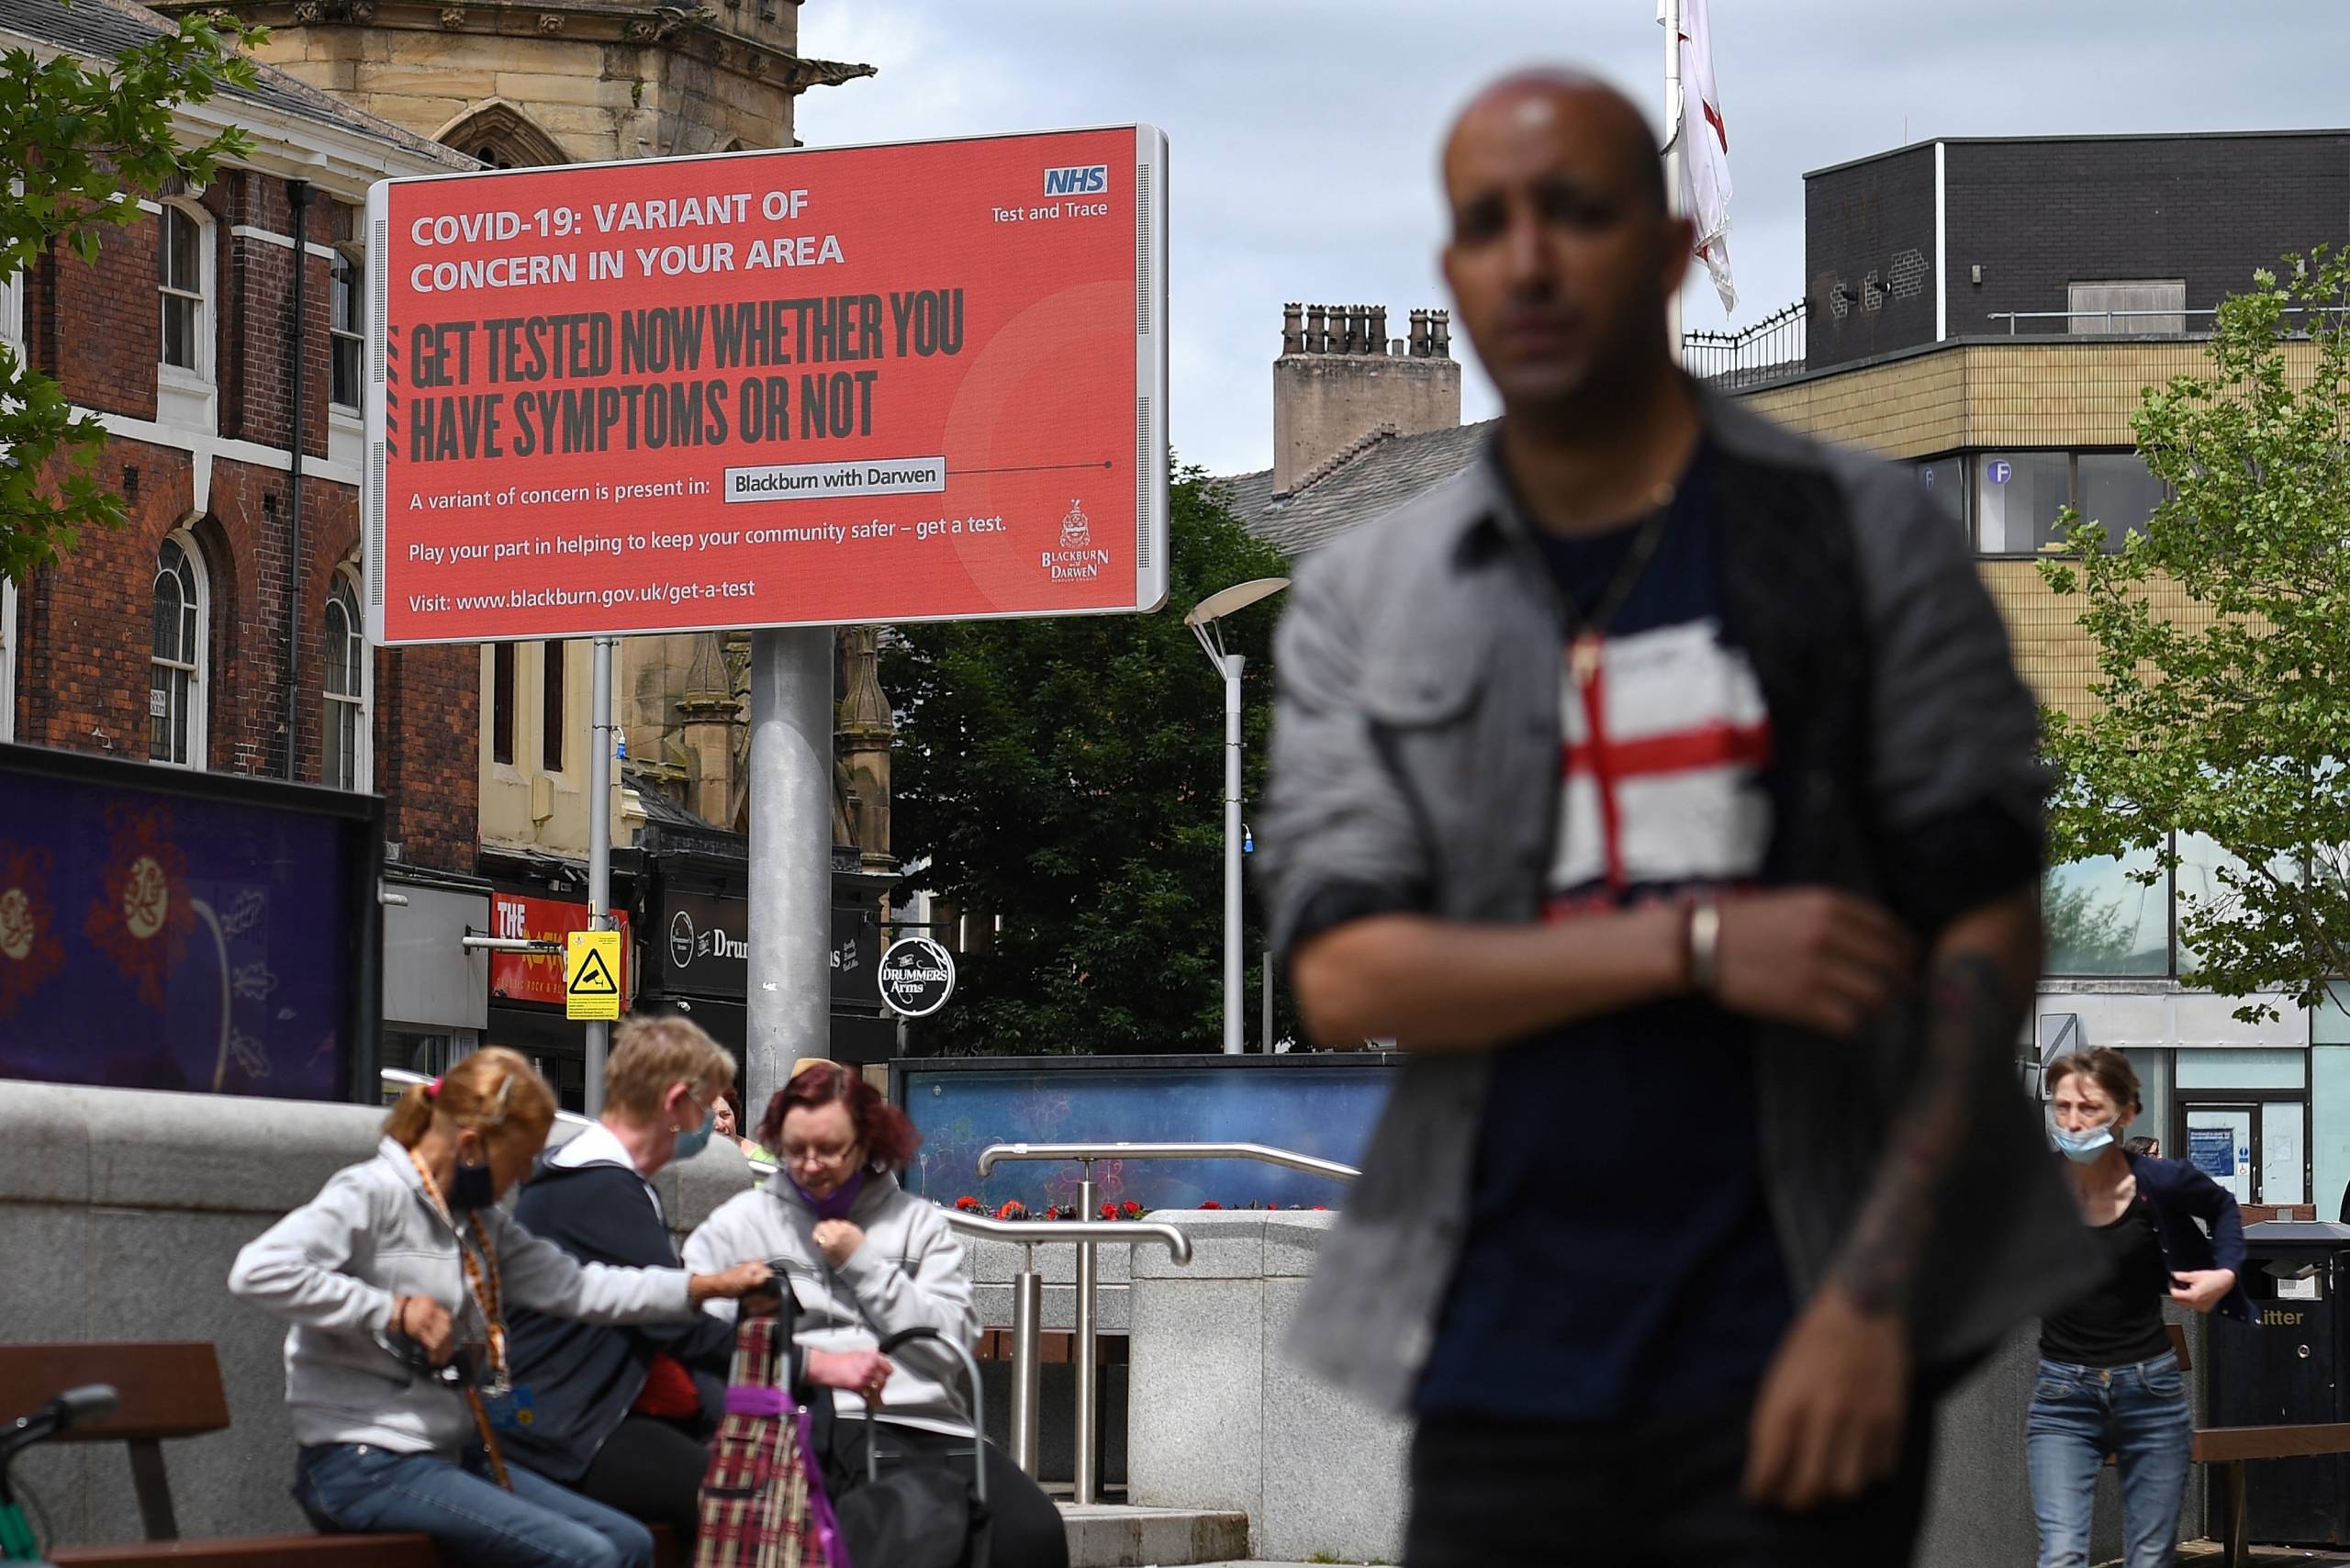 A sign urges people to get tested for a COVID-19 variant in Blackburn, England. The U.K. is experiencing a surge in the delta variant, which was first identified in India.